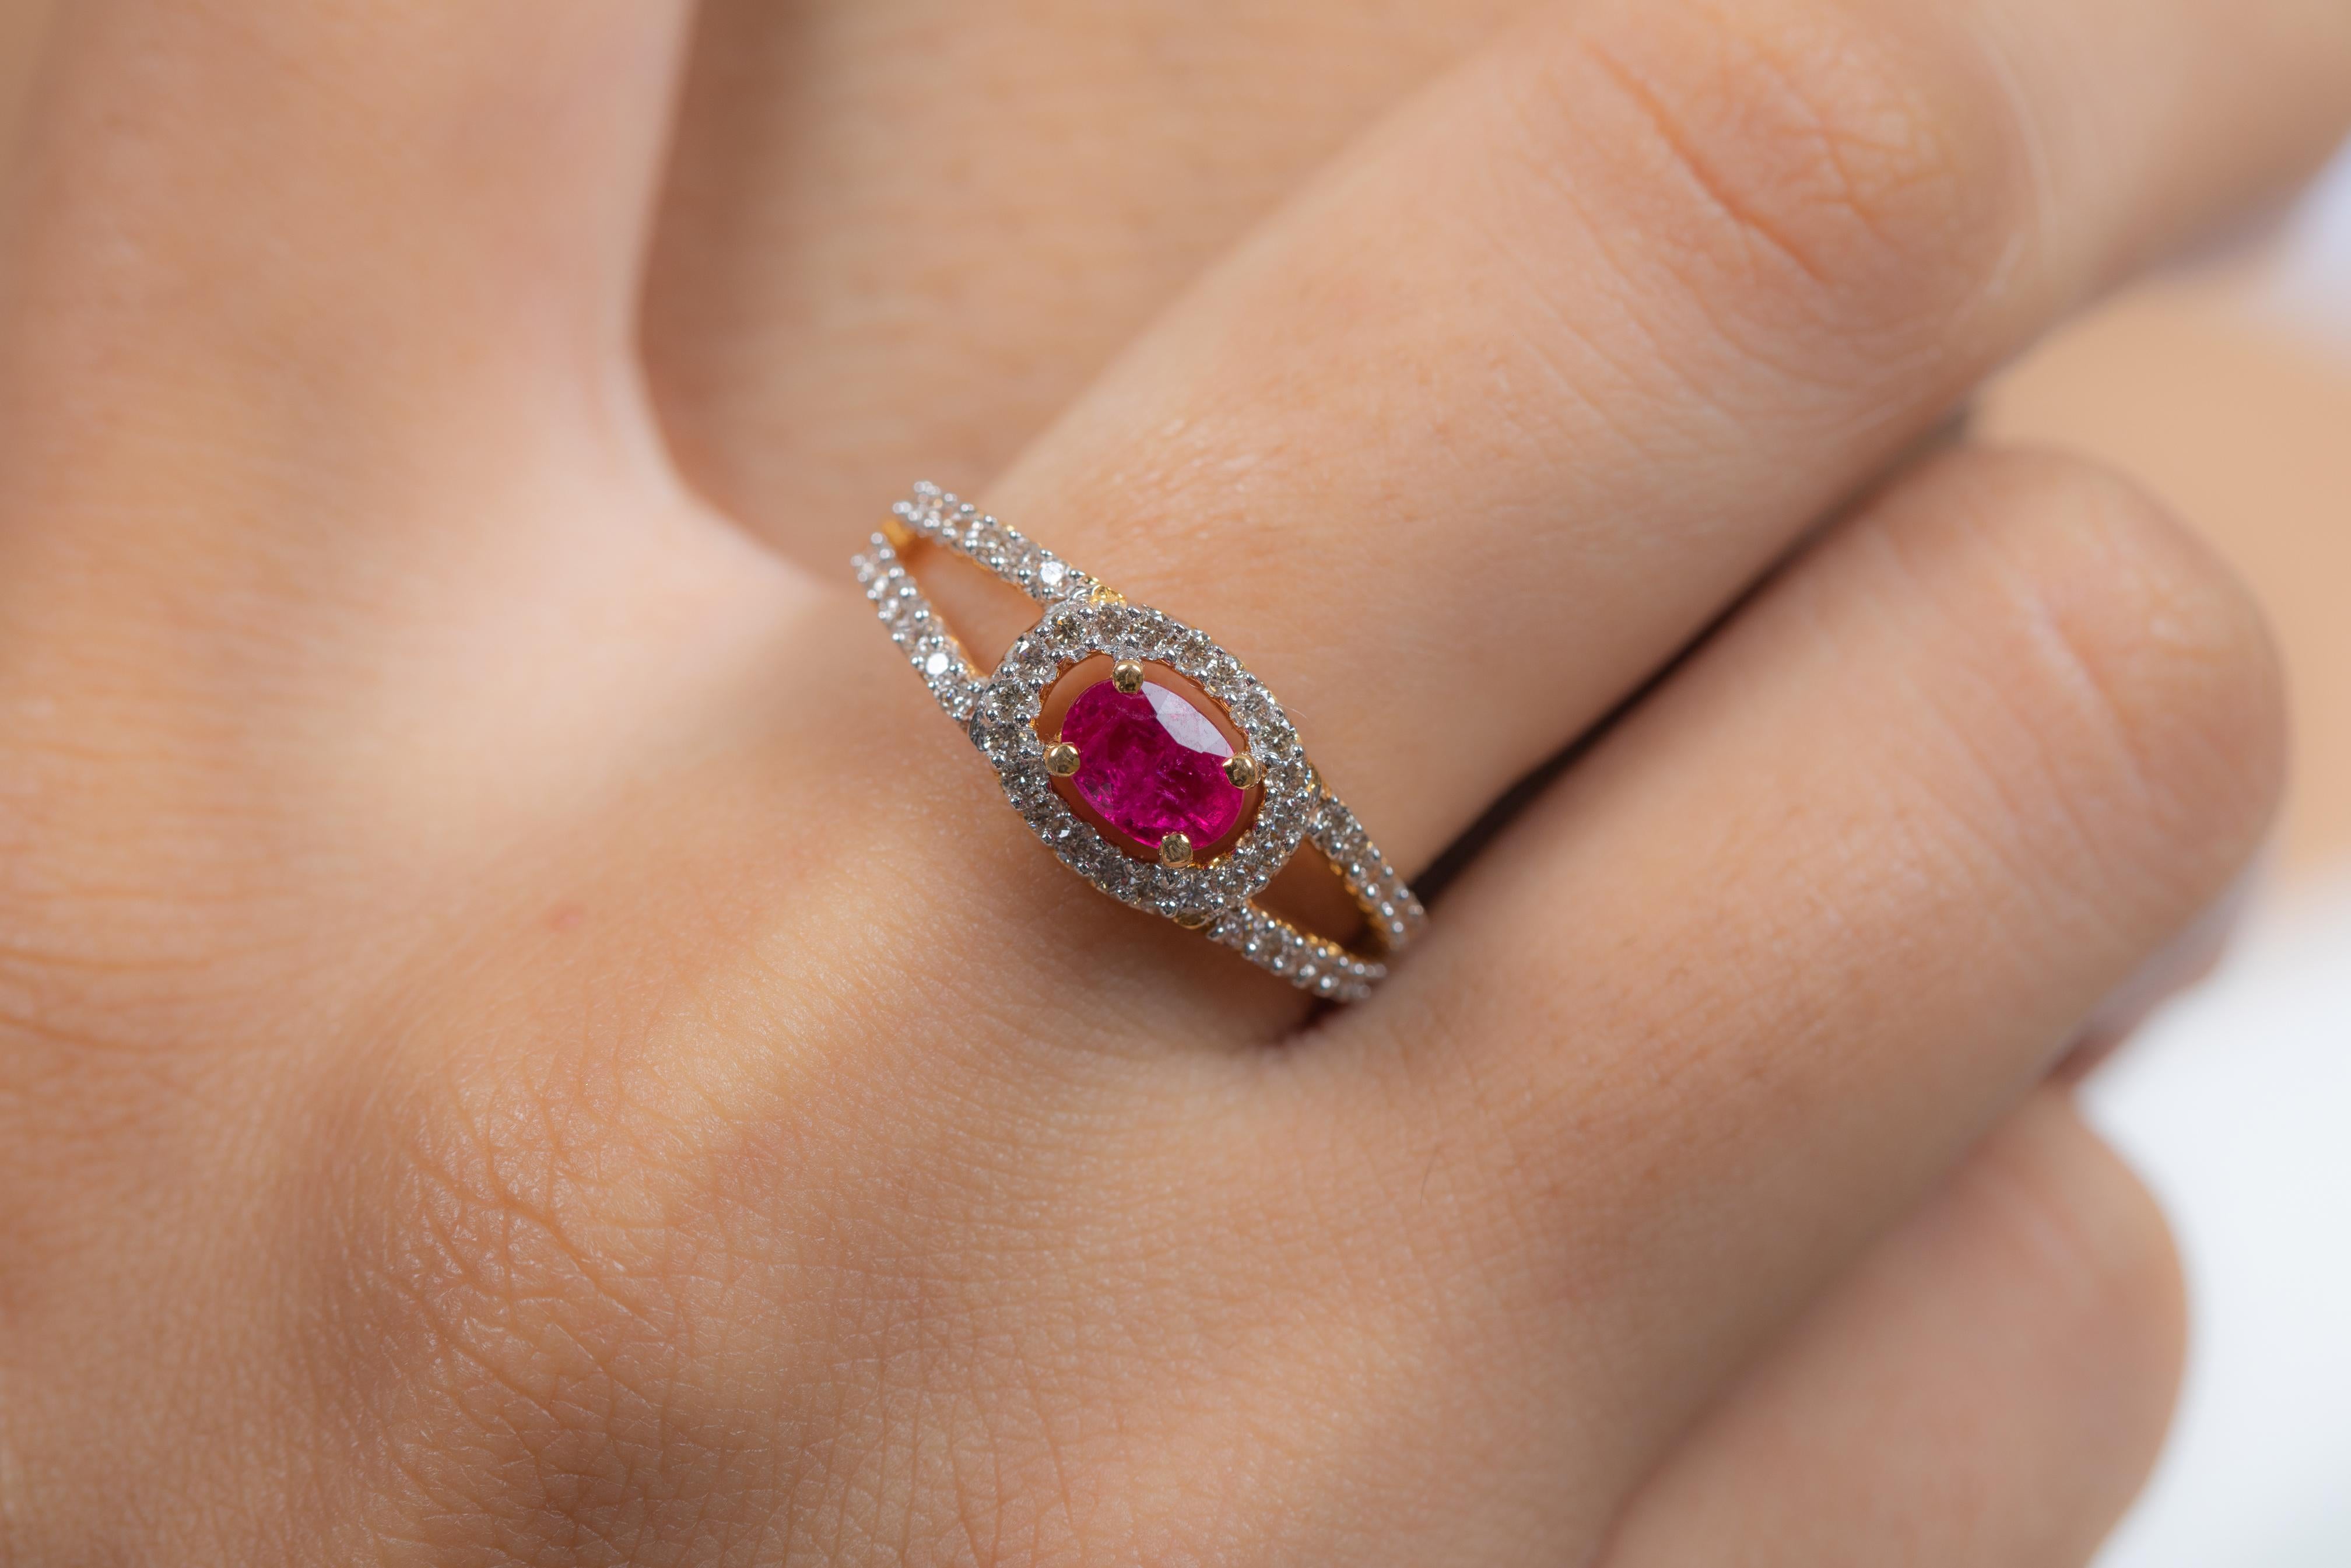 For Sale:  18K Yellow Gold Center Oval Cut Ruby Wedding Ring with Halo of Diamonds 2